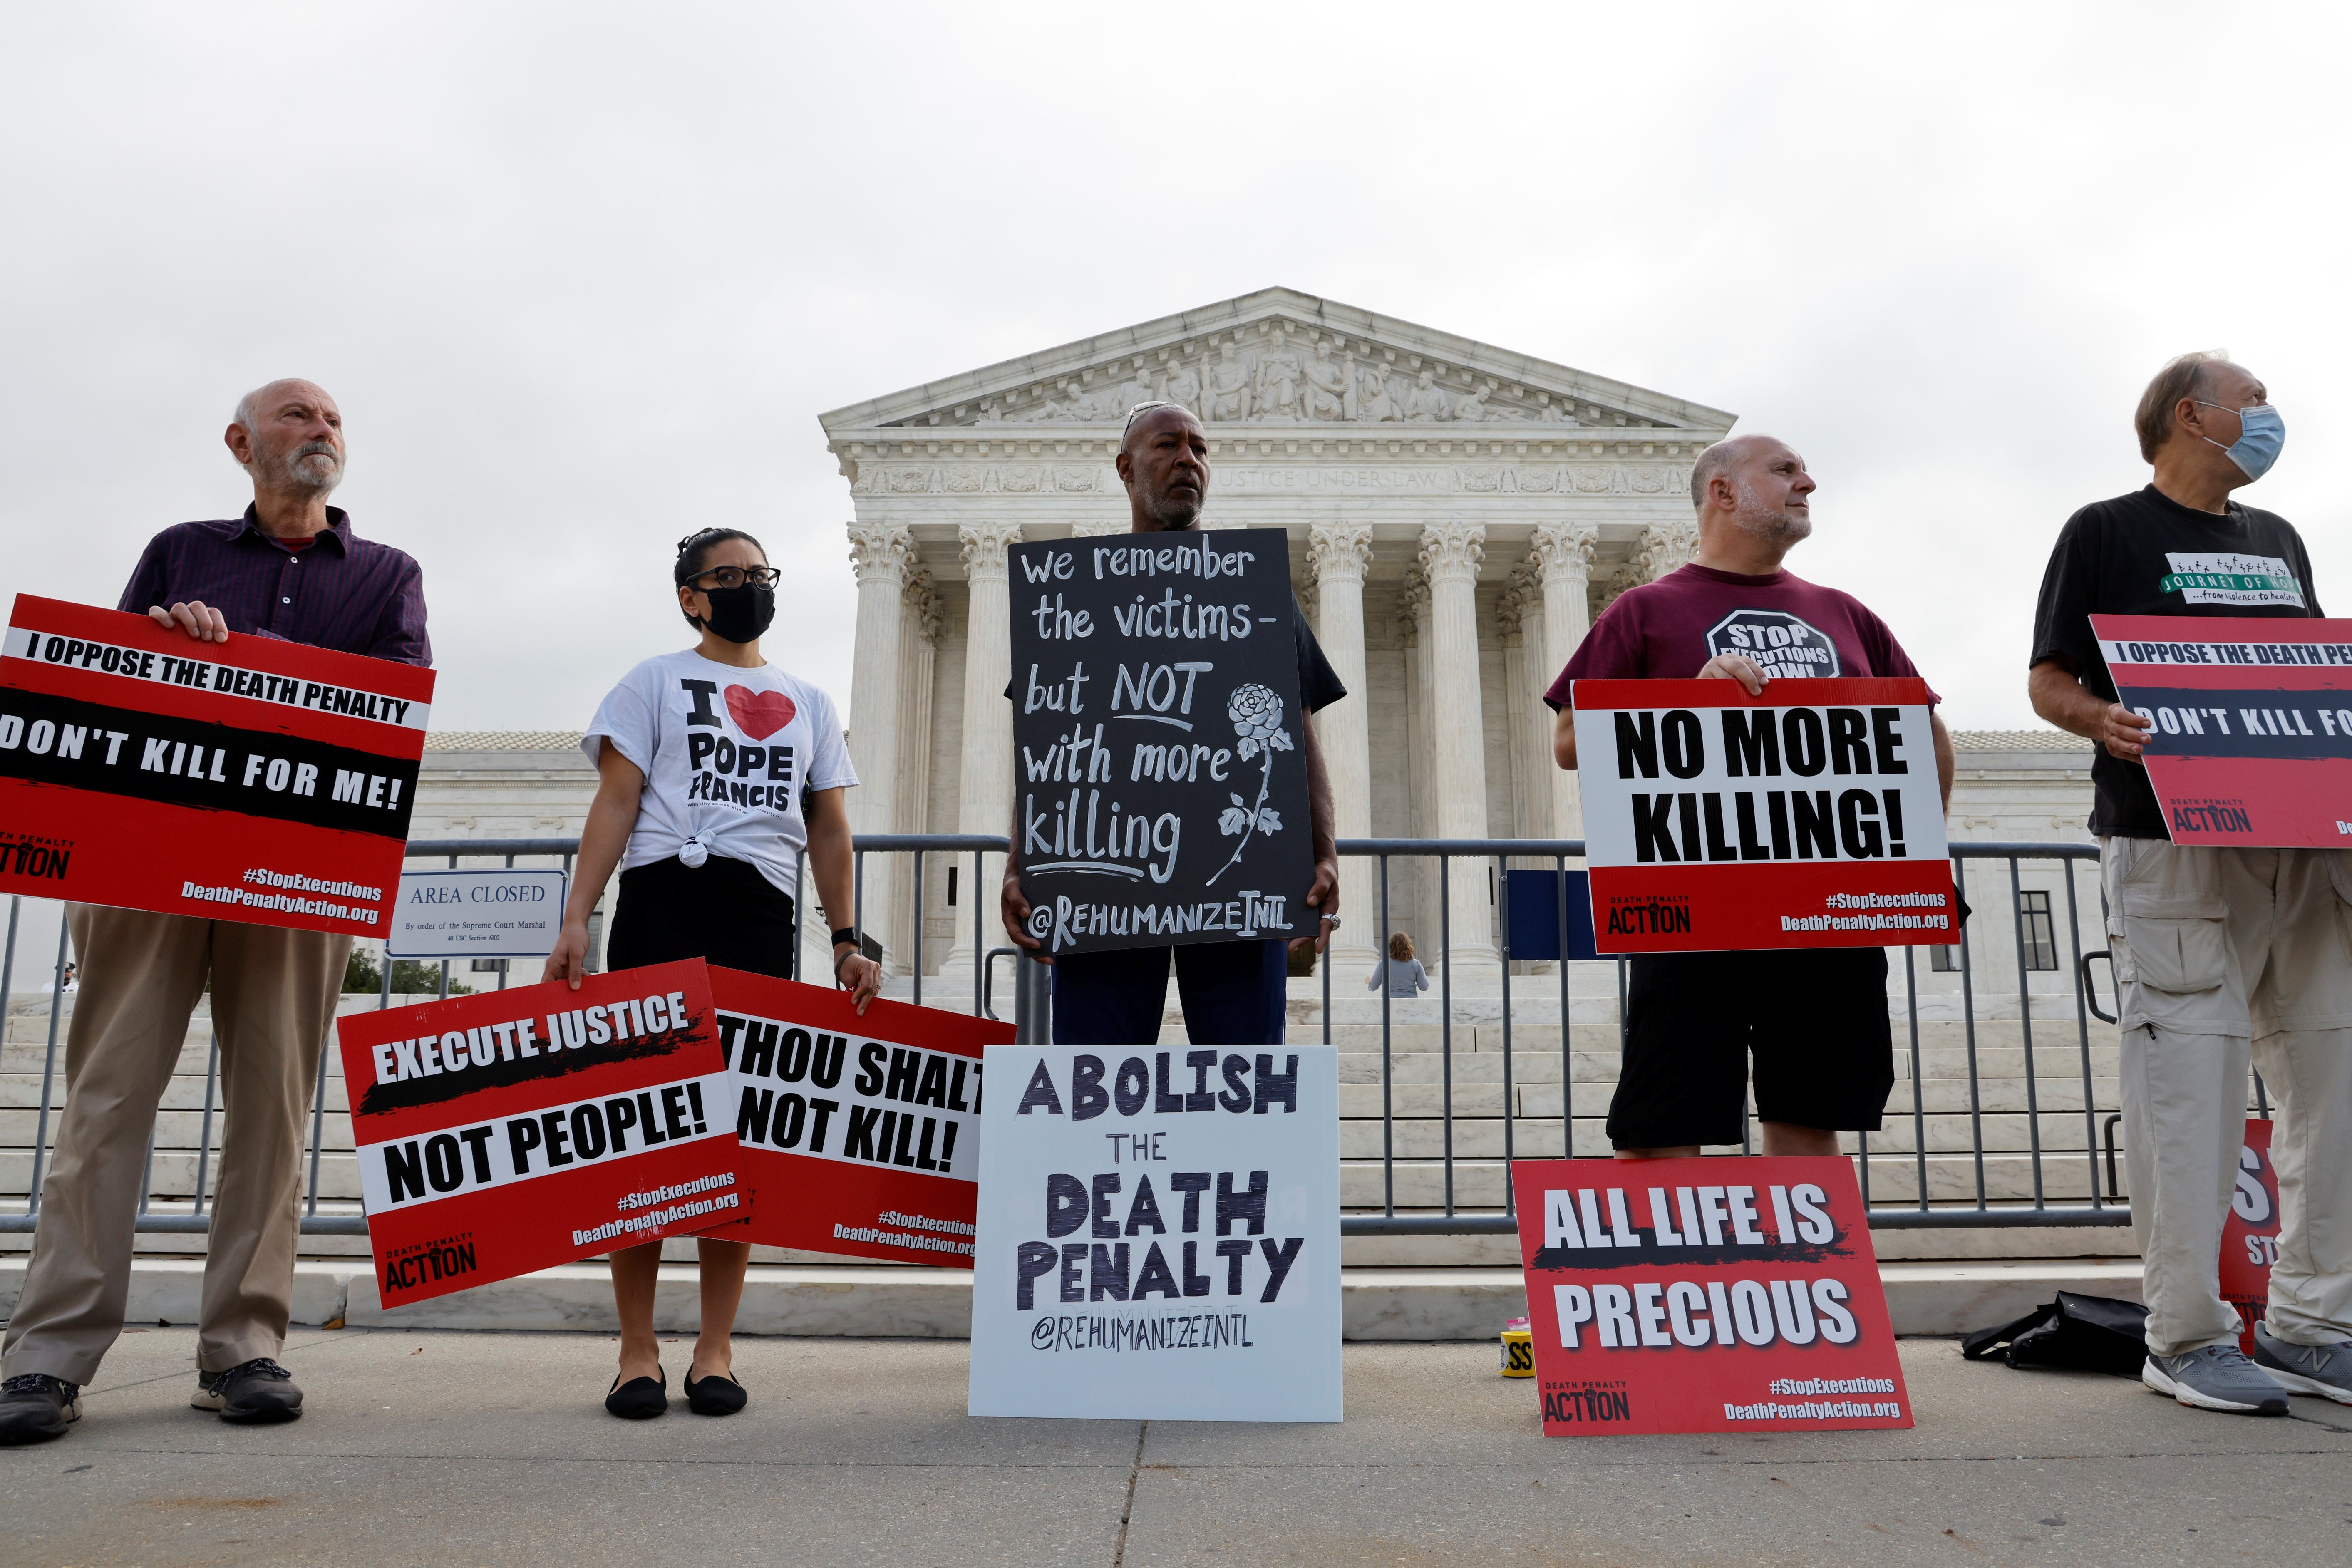 Demonstrators in Washington rally against the death penalty outside the U.S. Supreme Court building Oct. 13, 2021. (CNS photo/Jonathan Ernst, Reuters)